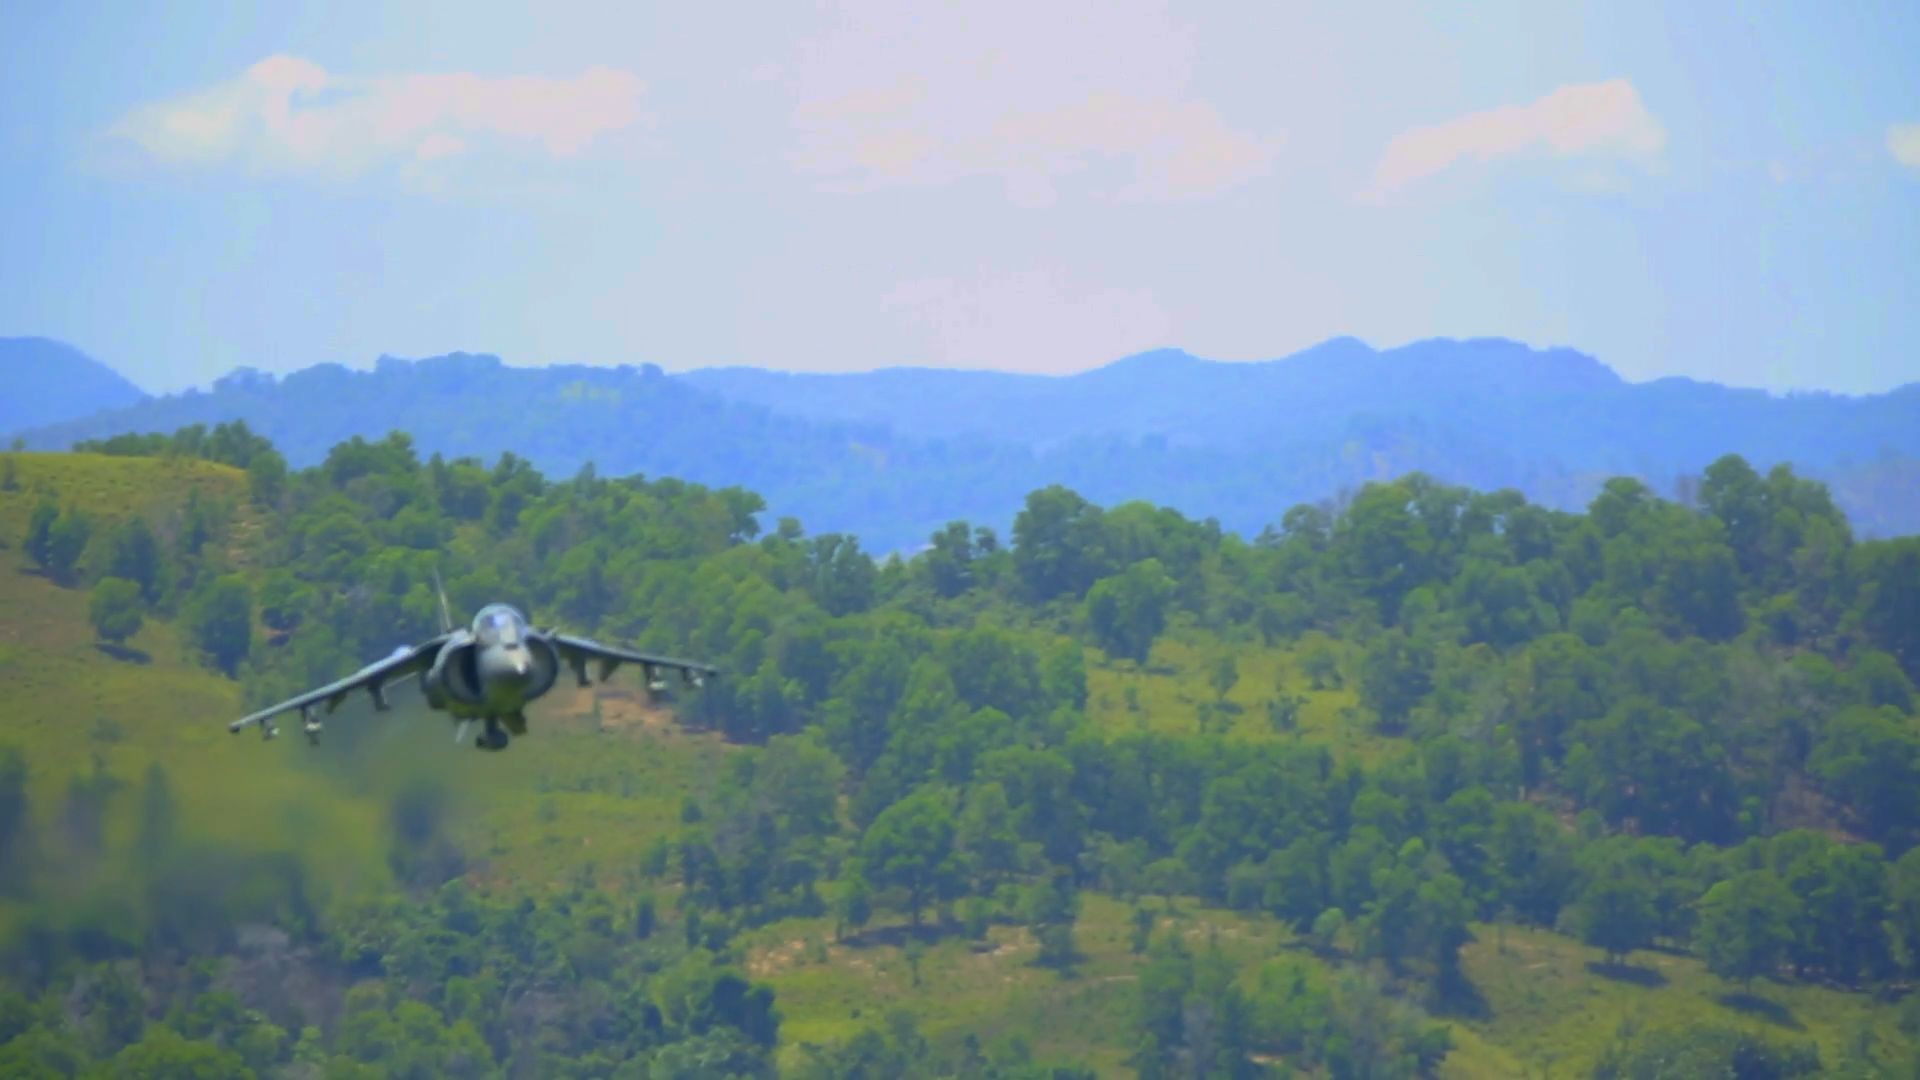 Watch USMC AV-8B carrying out low-level strike in Malaysia